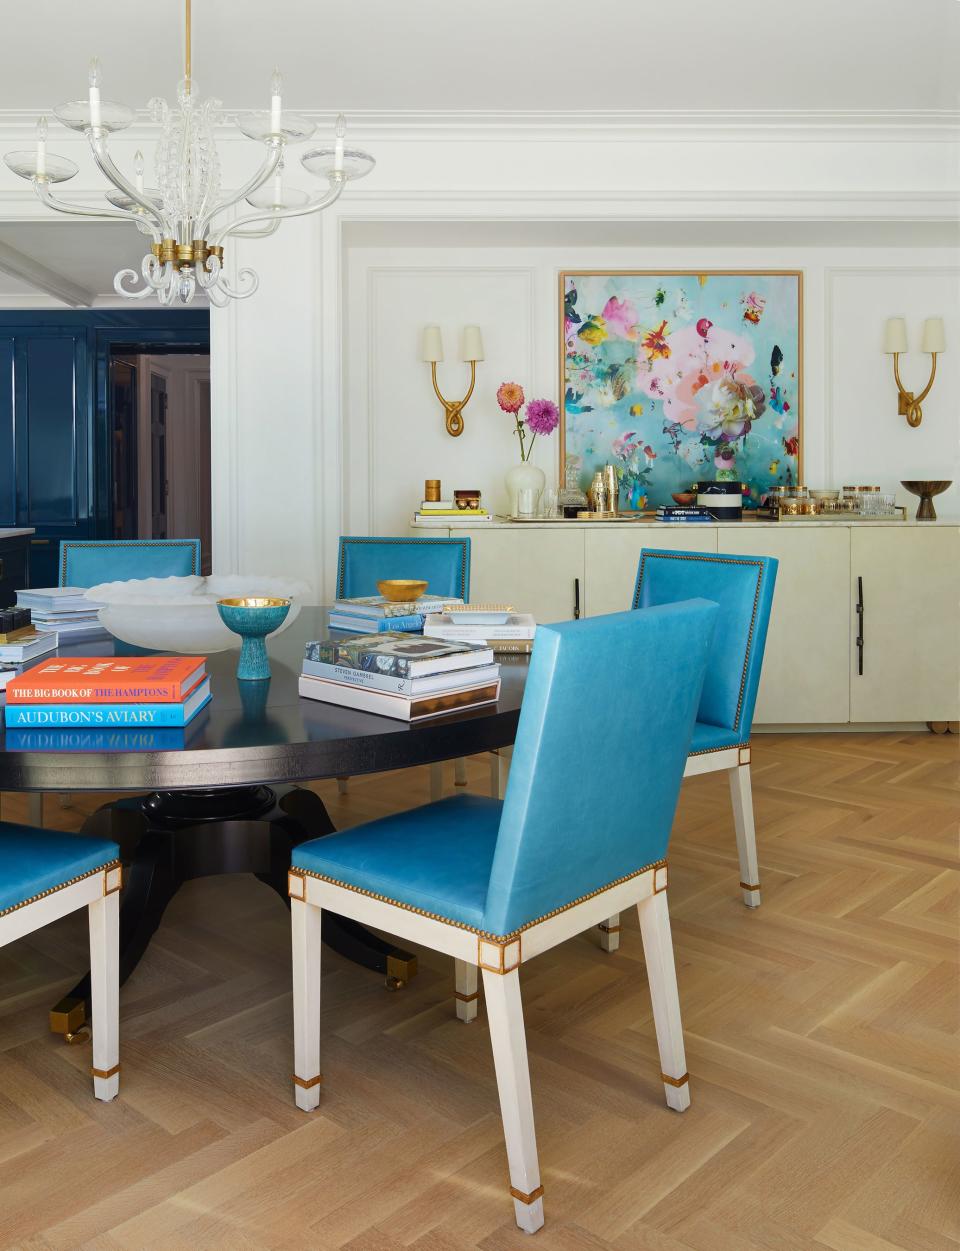 In the dining area, custom chairs in a gesso finish with turquoise Italian leather surround a custom ebonized table under a 1940s Venini chandelier. Behind, an alcove holds the custom bar in a faux parchment finish with an Isabelle Menin photograph above it.